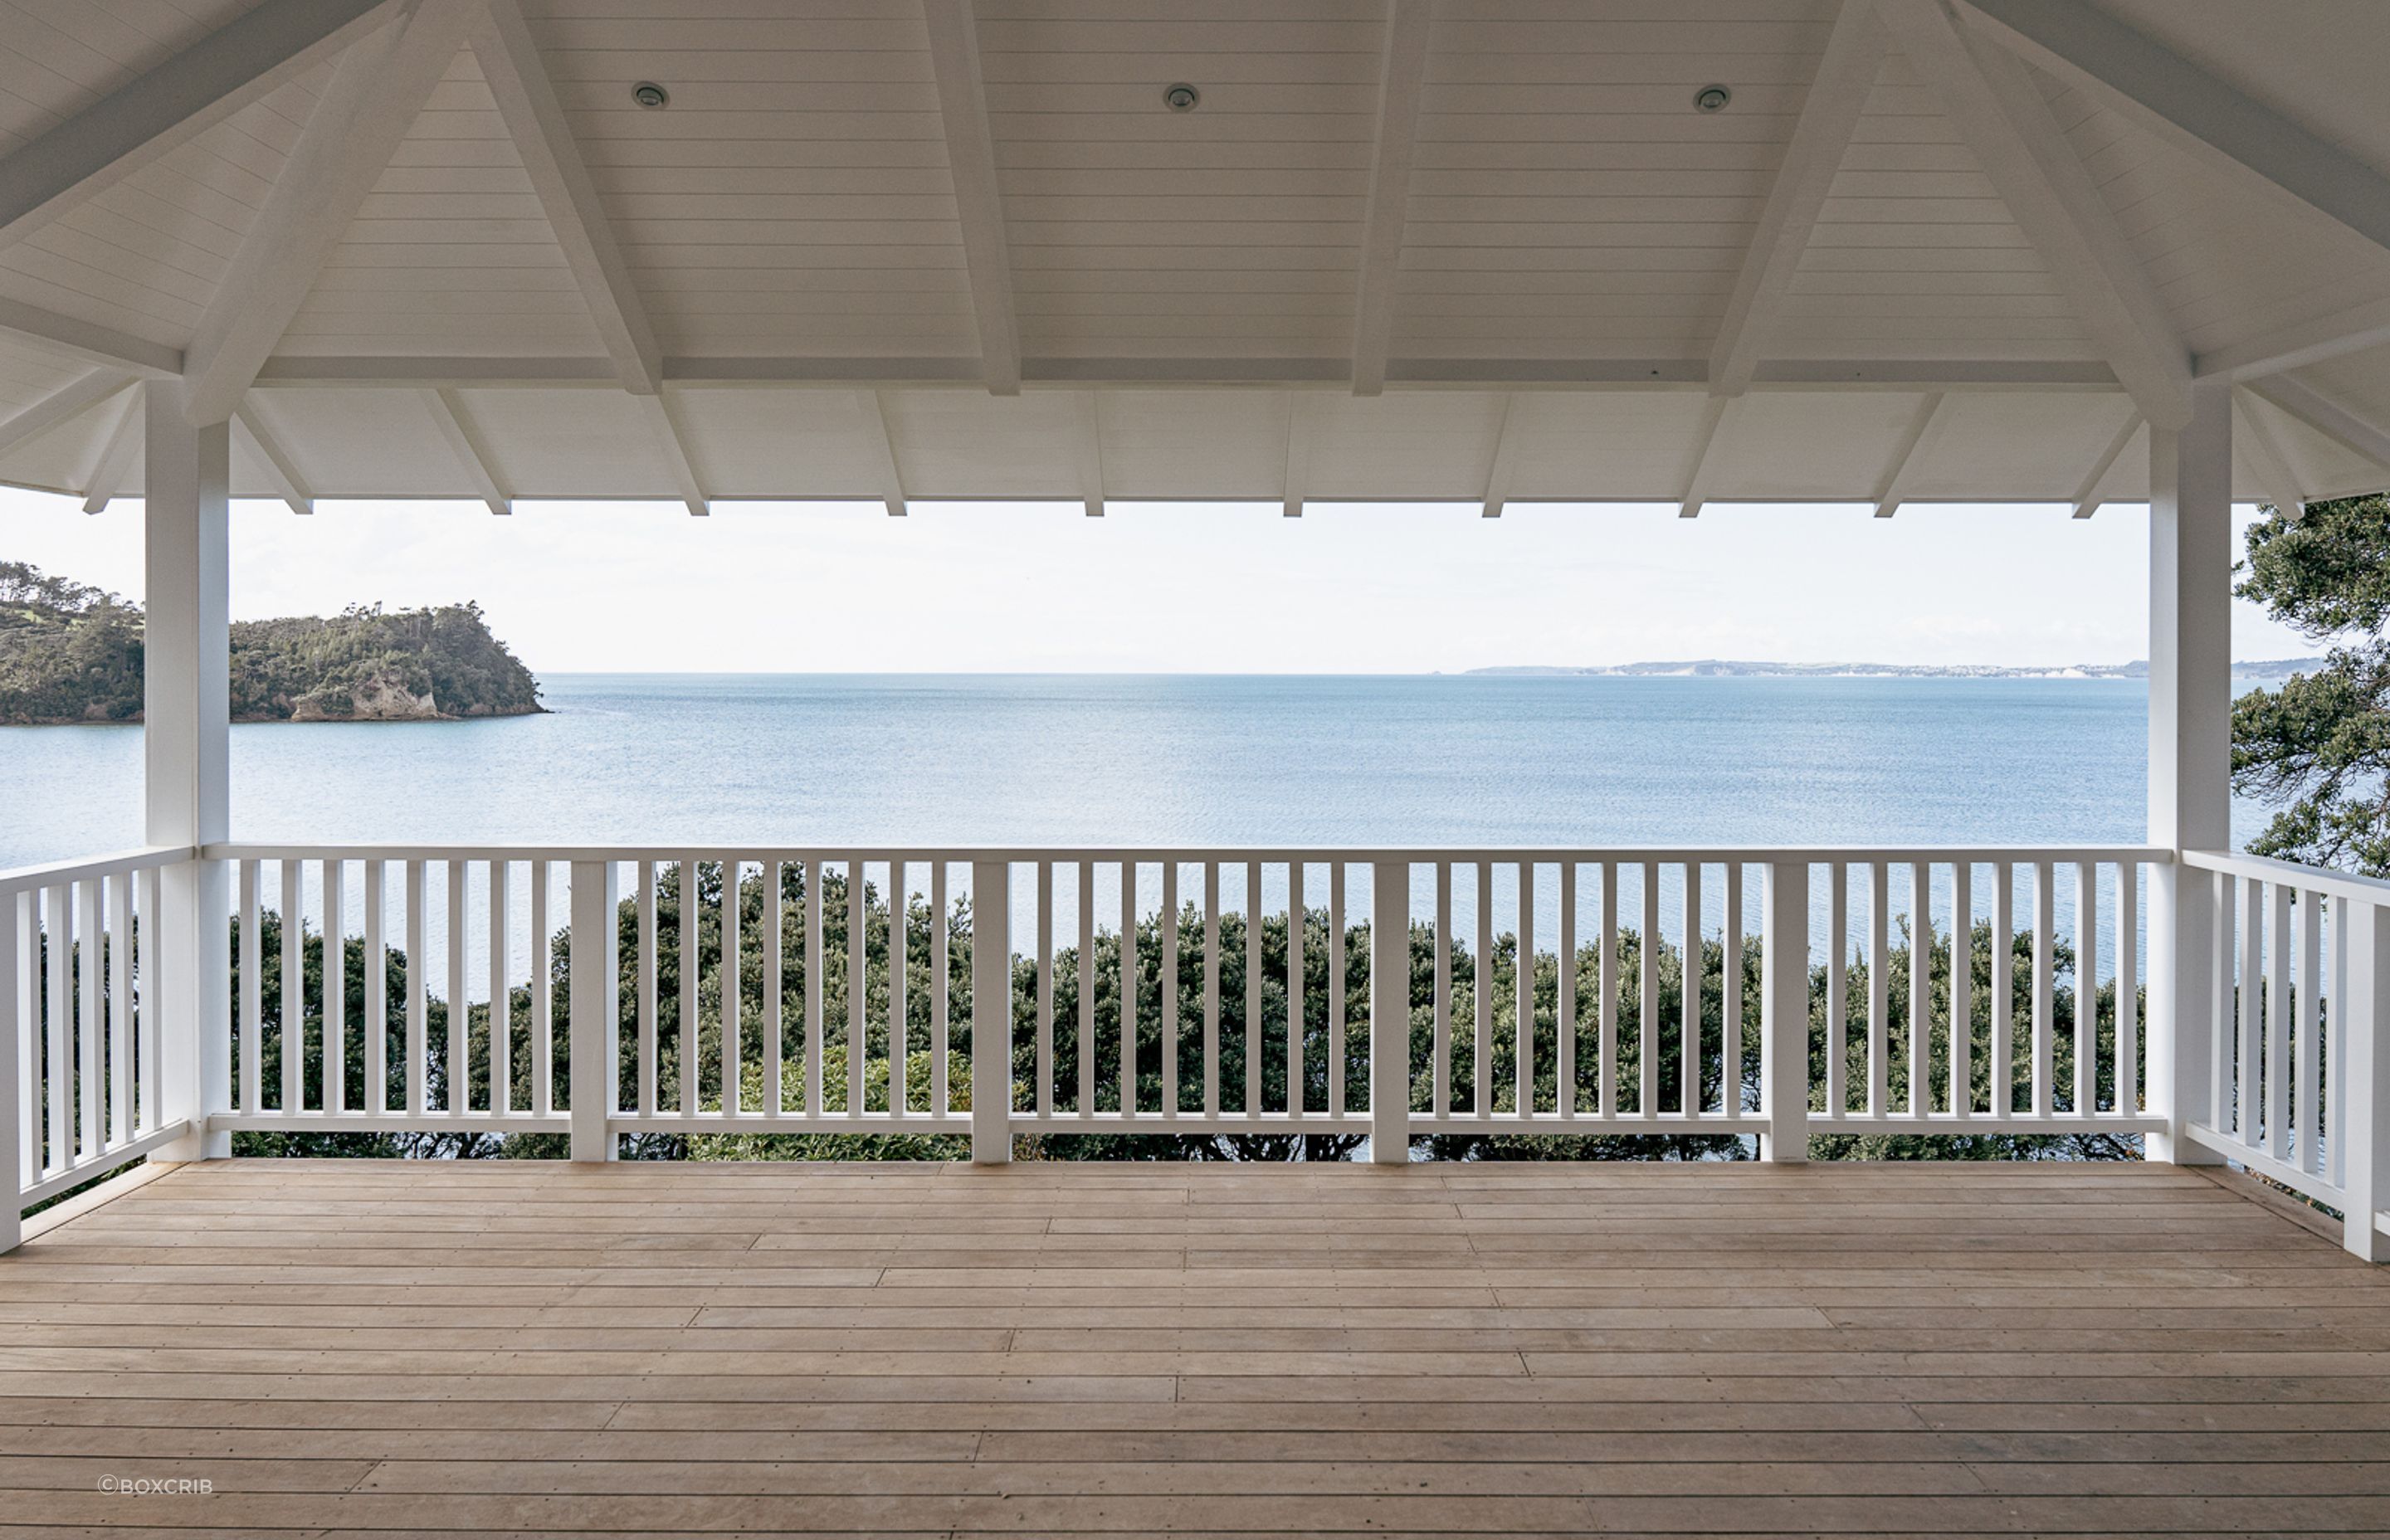 The expansive ocean views are perfectly framed by the upstairs outdoor living space.